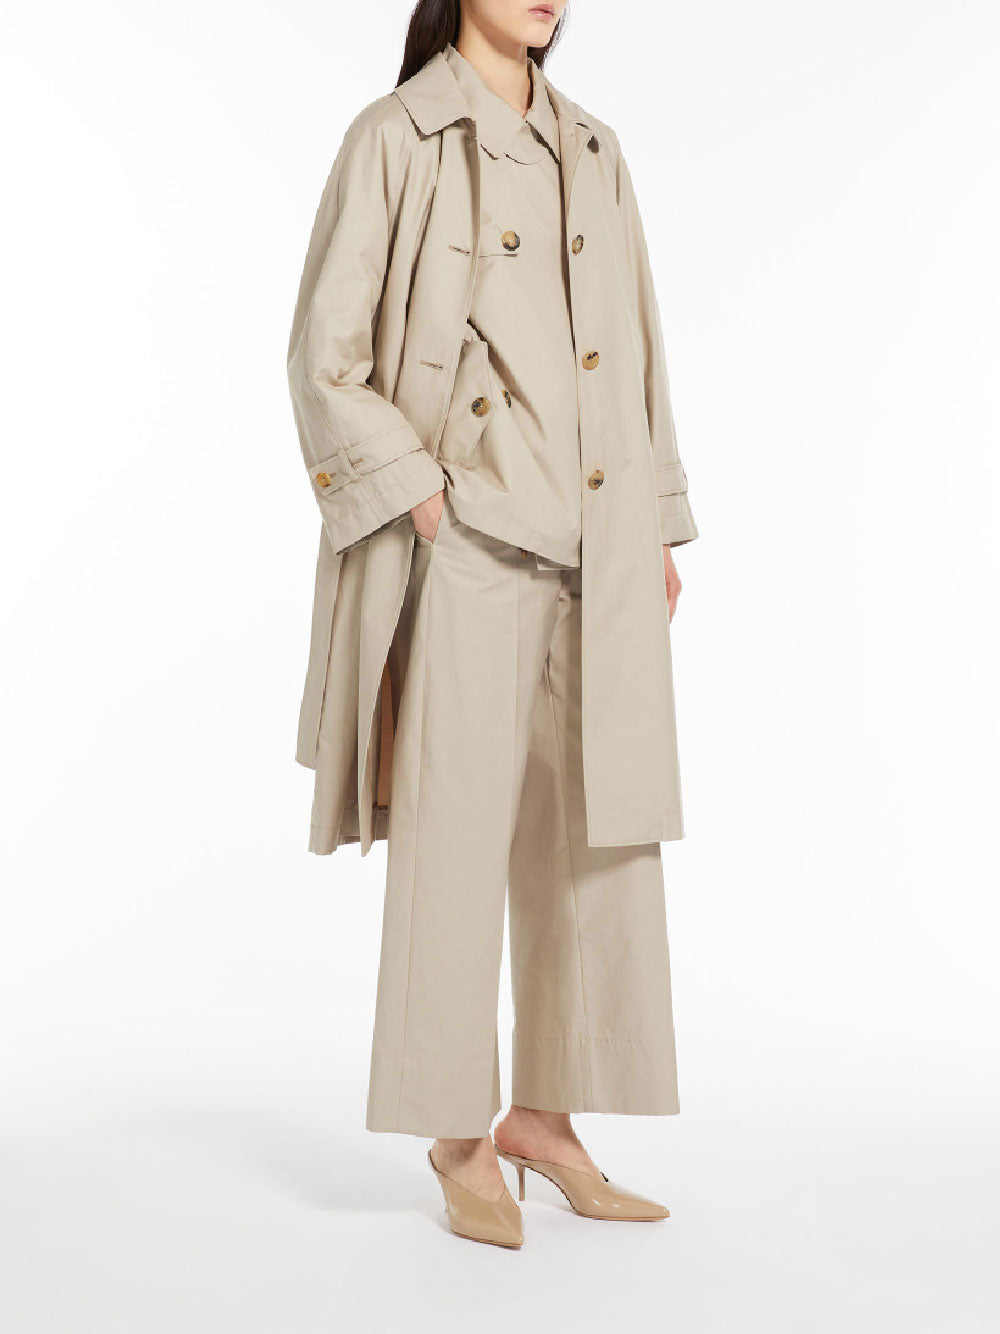 Ftrench trench coat